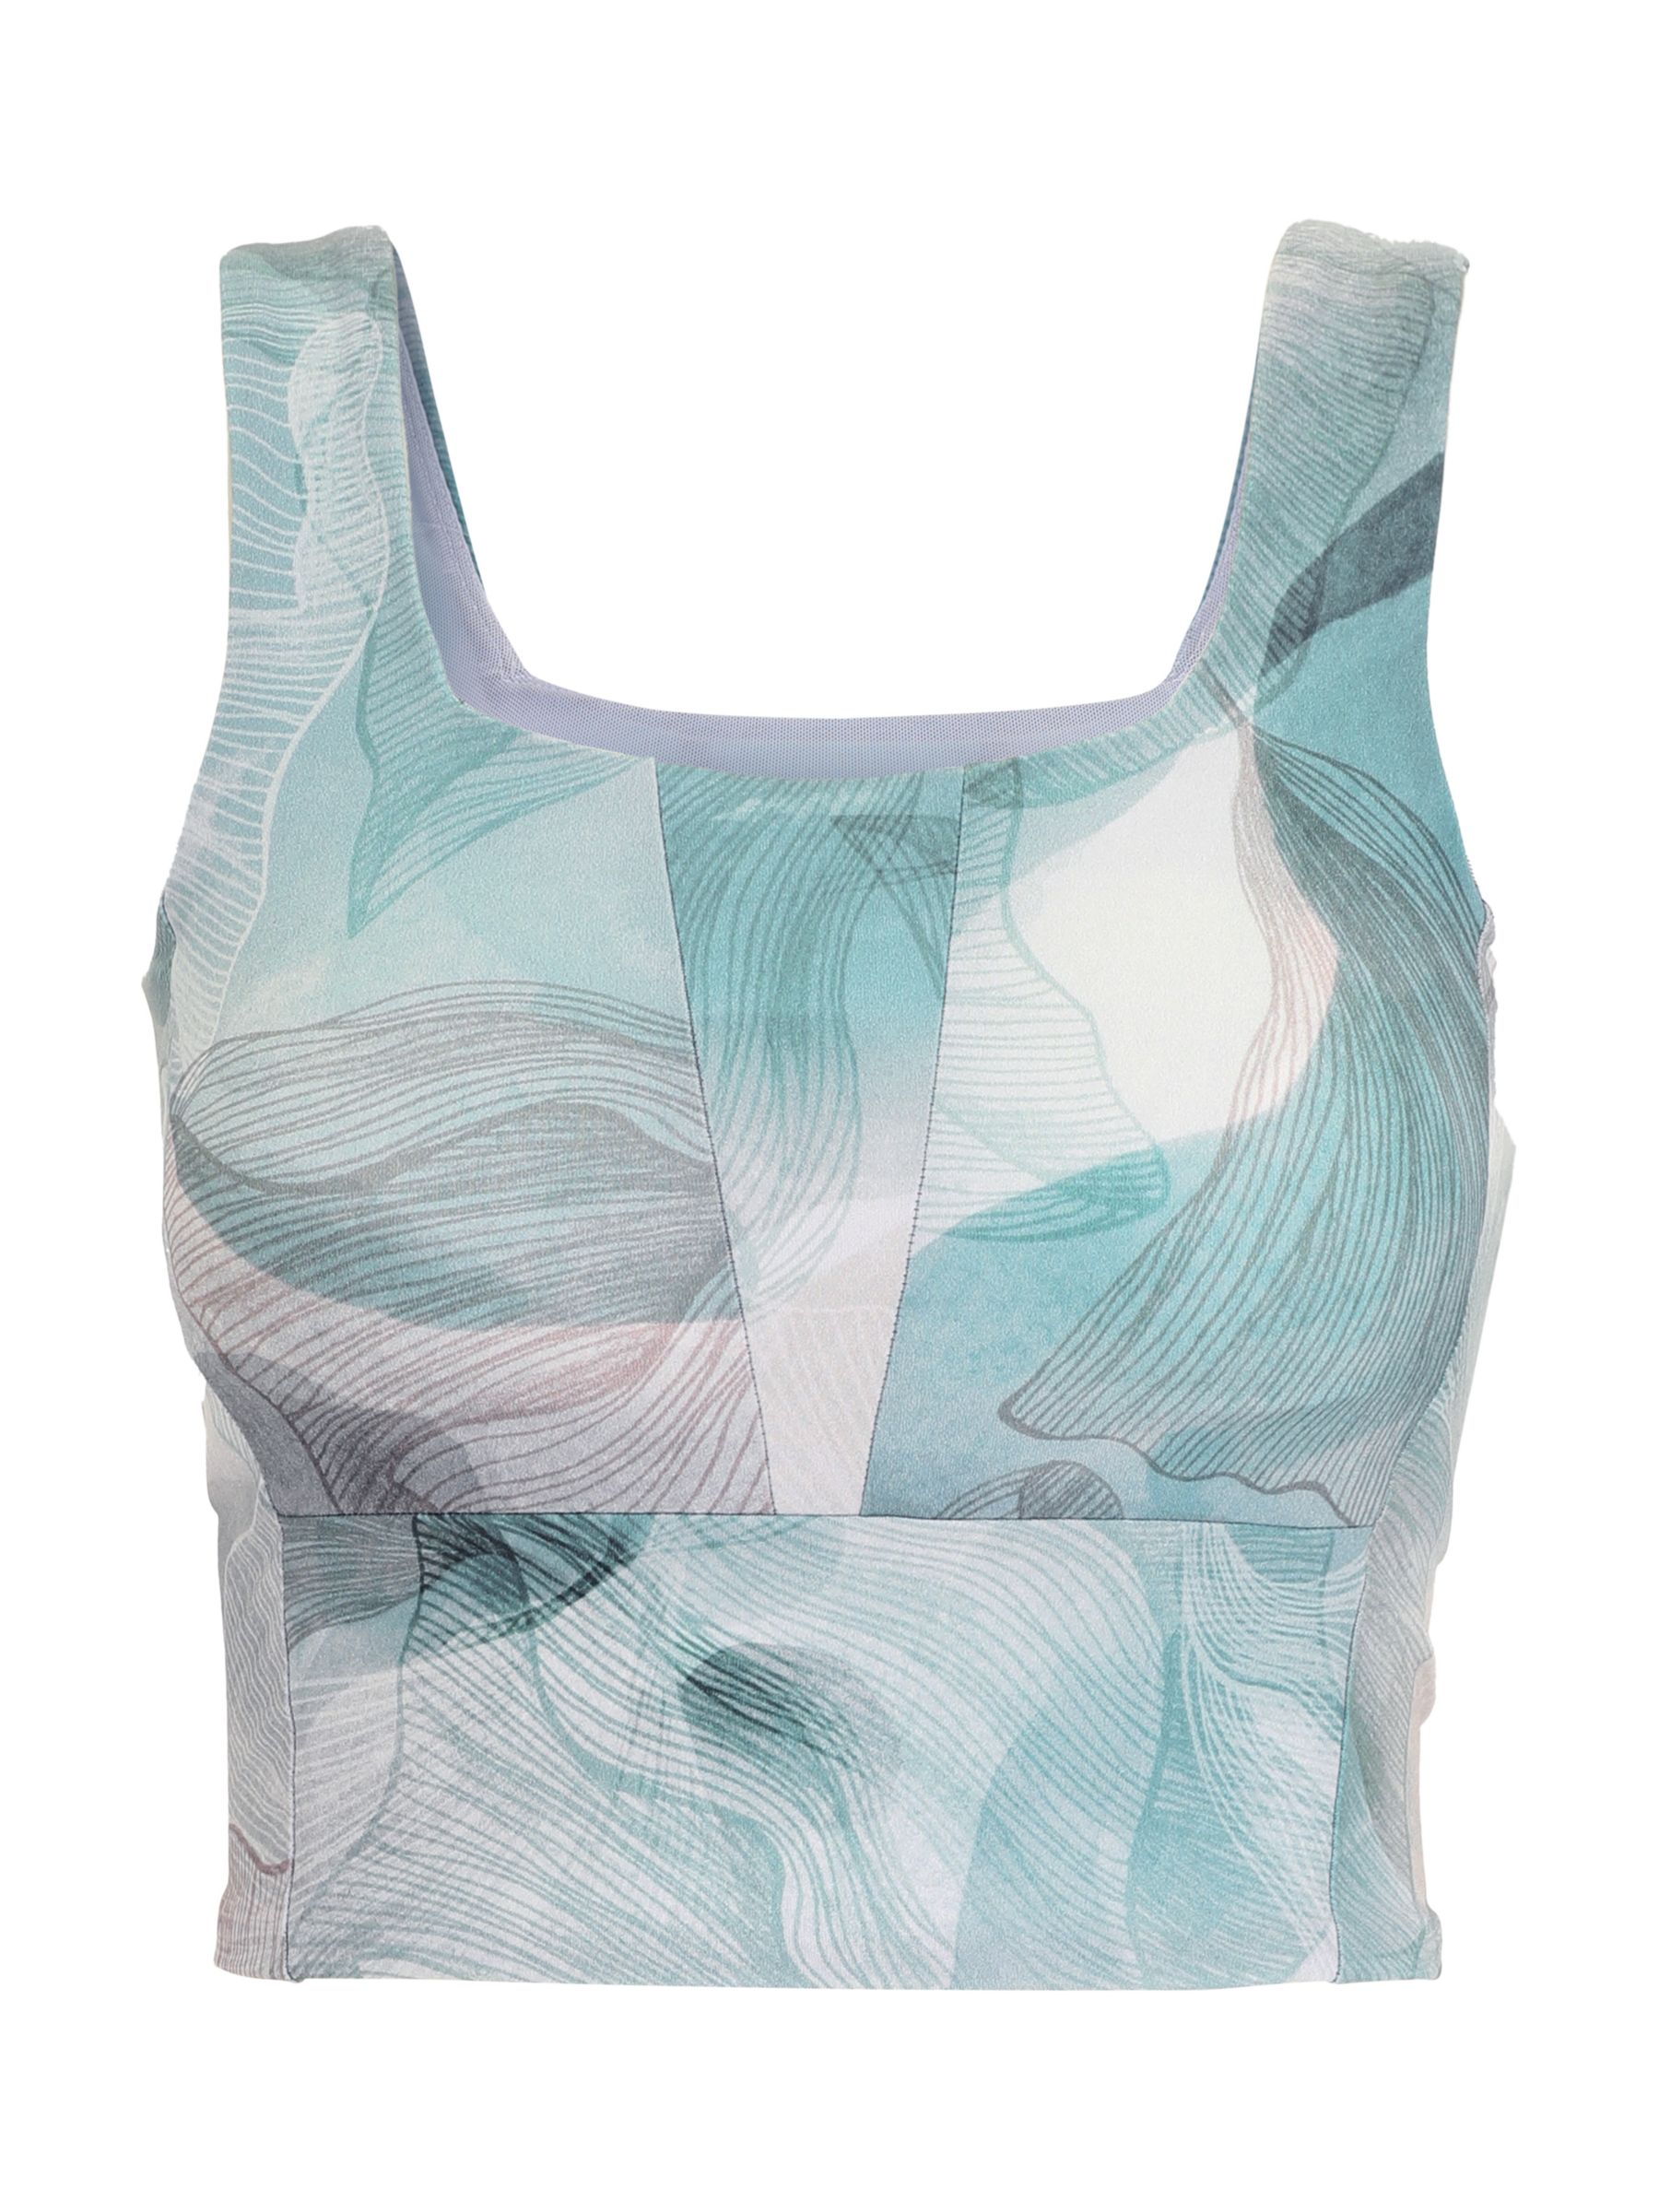 Venice Beach Aaliyah Cropped Gym Top, Ginkgo Leaves, XS